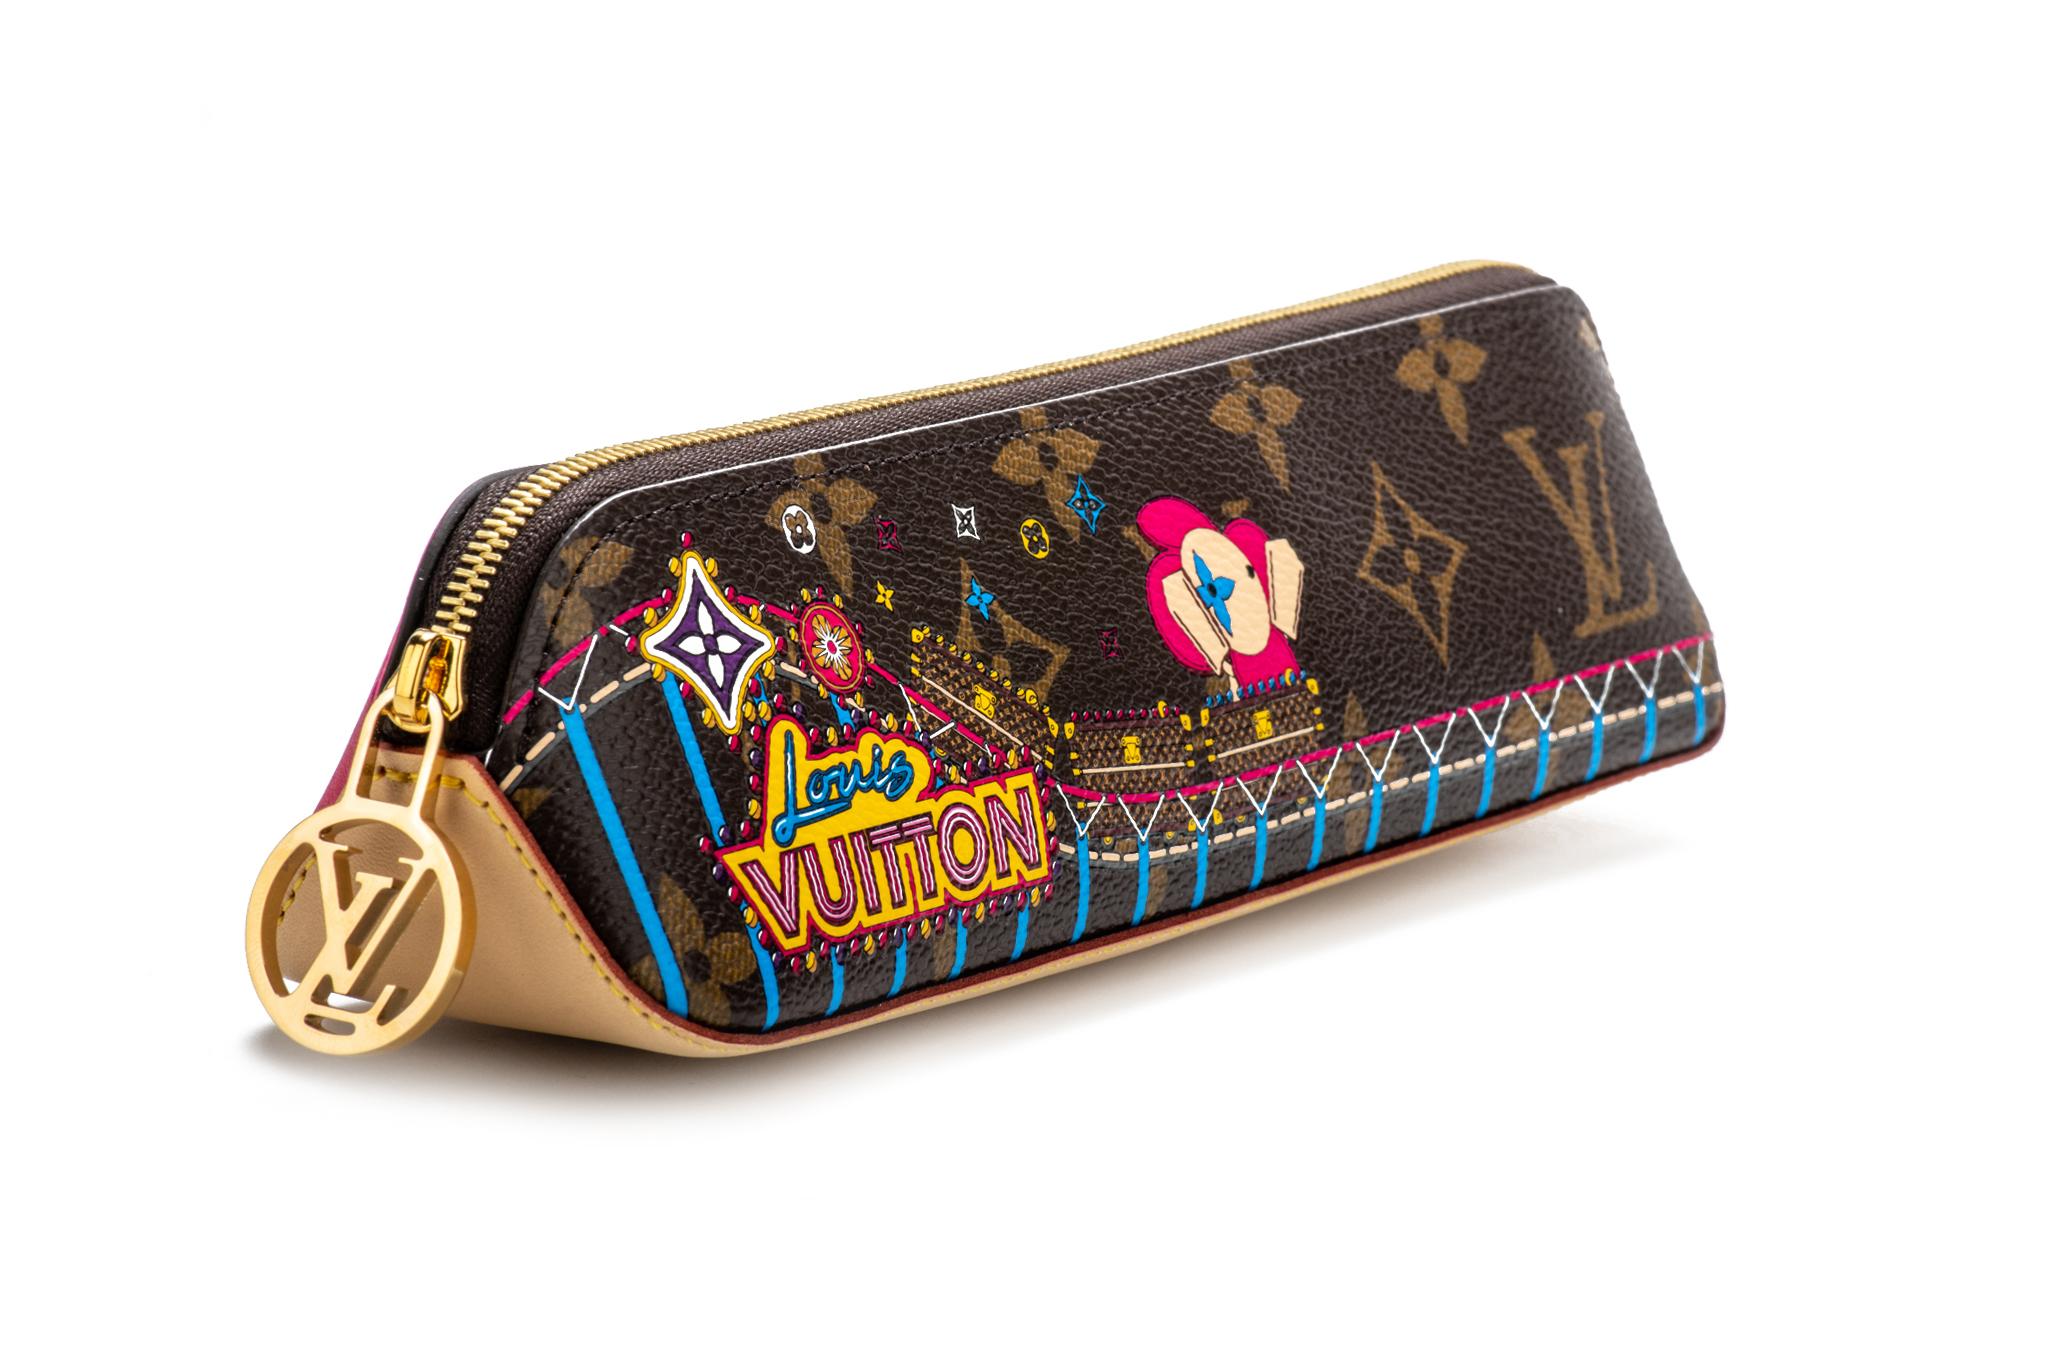 Vuitton Christmas 2020 limited edition Rollercoaster pencil pouch. Brand new in box with dust cover.